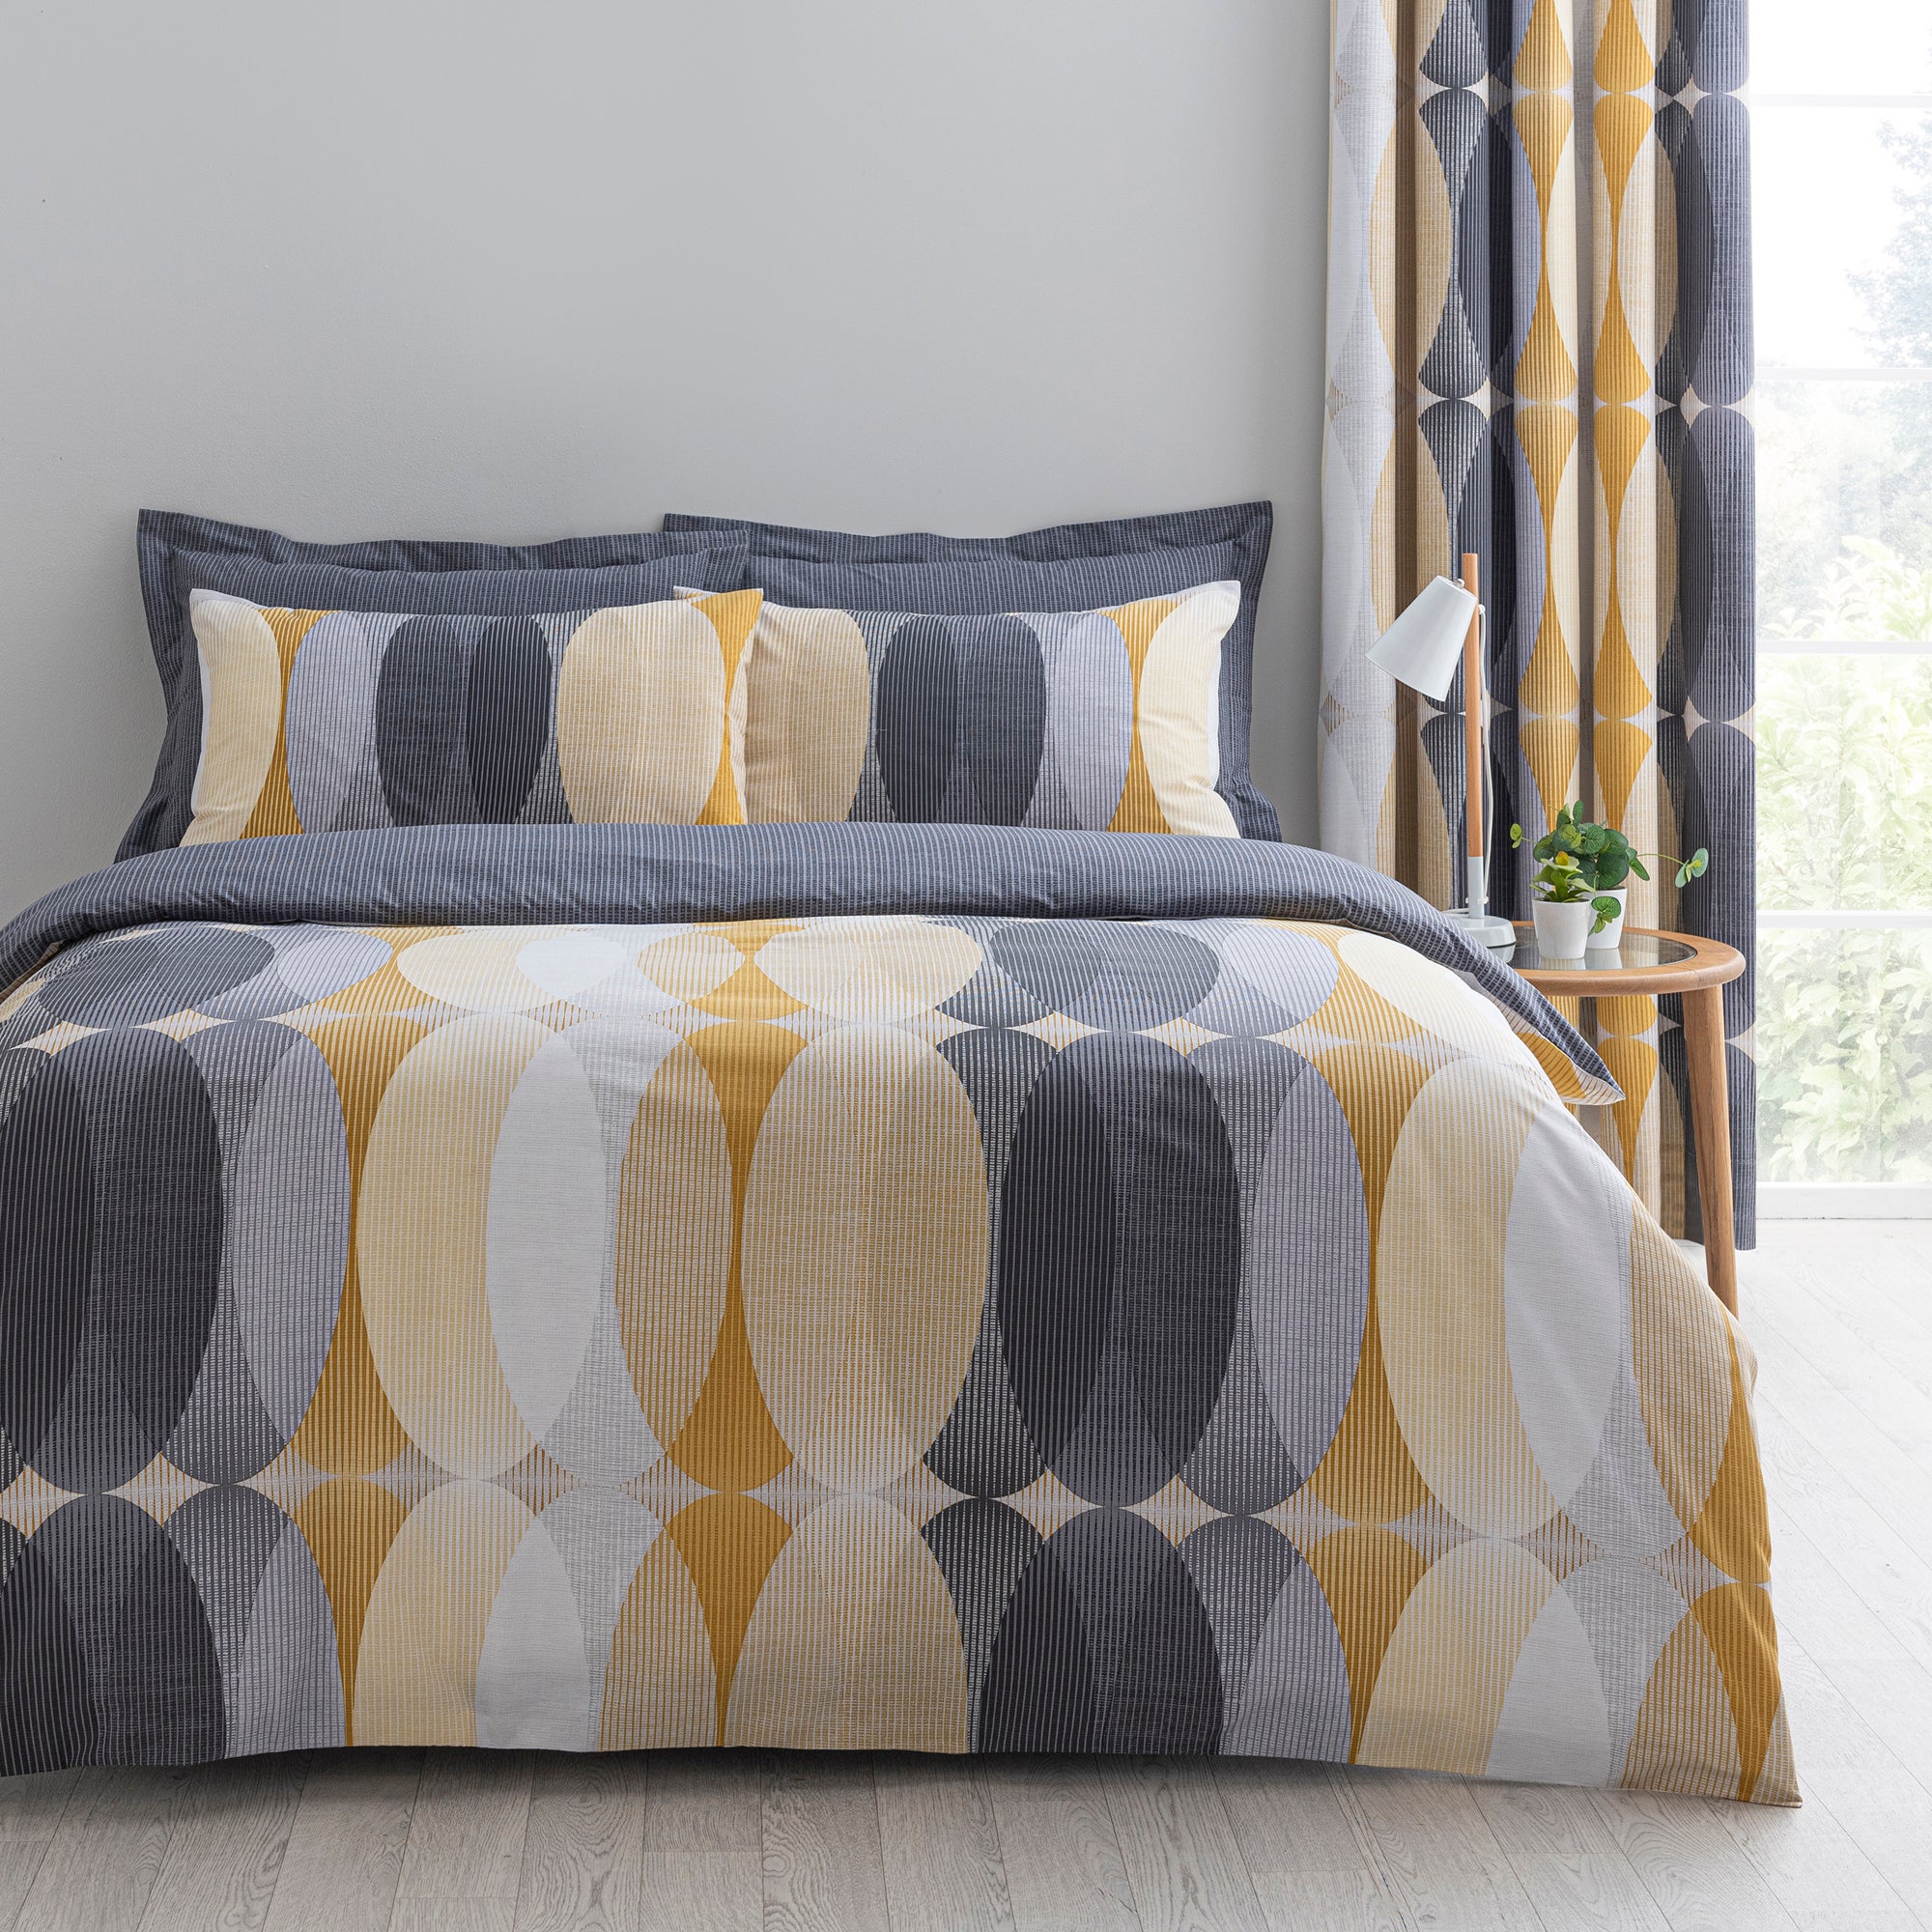 Elements Elijah Ochre Reversible Duvet Cover And Pillowcase Set Yellow Blue And White